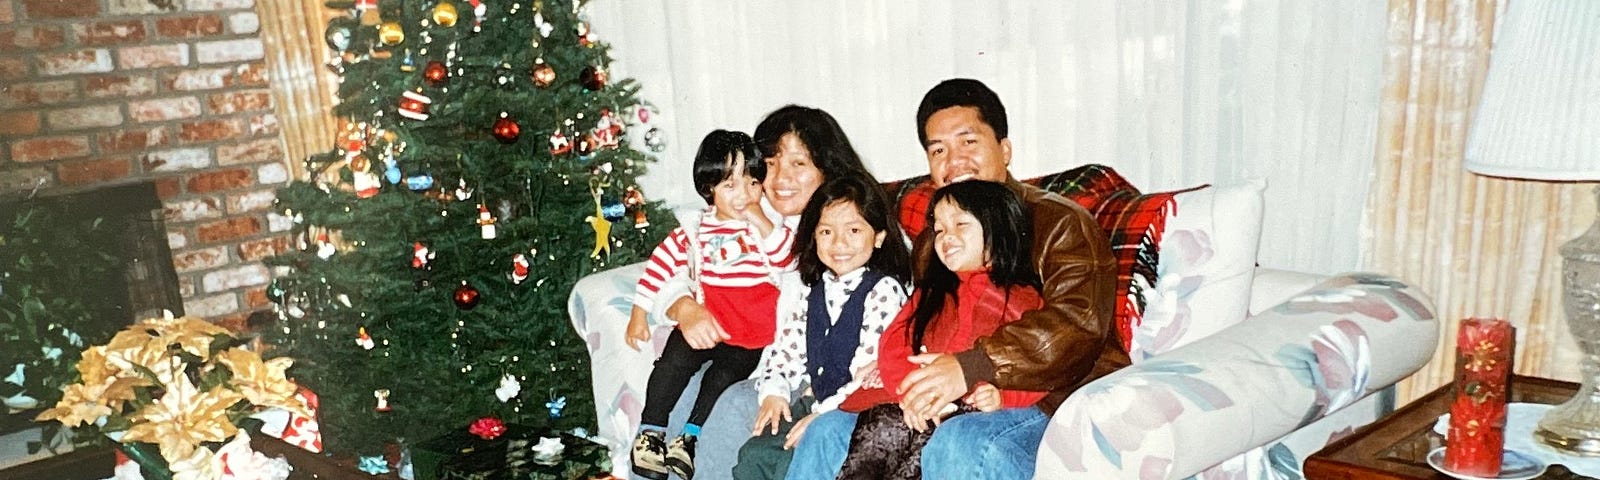 Family of 5 sitting at a couch by a Christmas tree